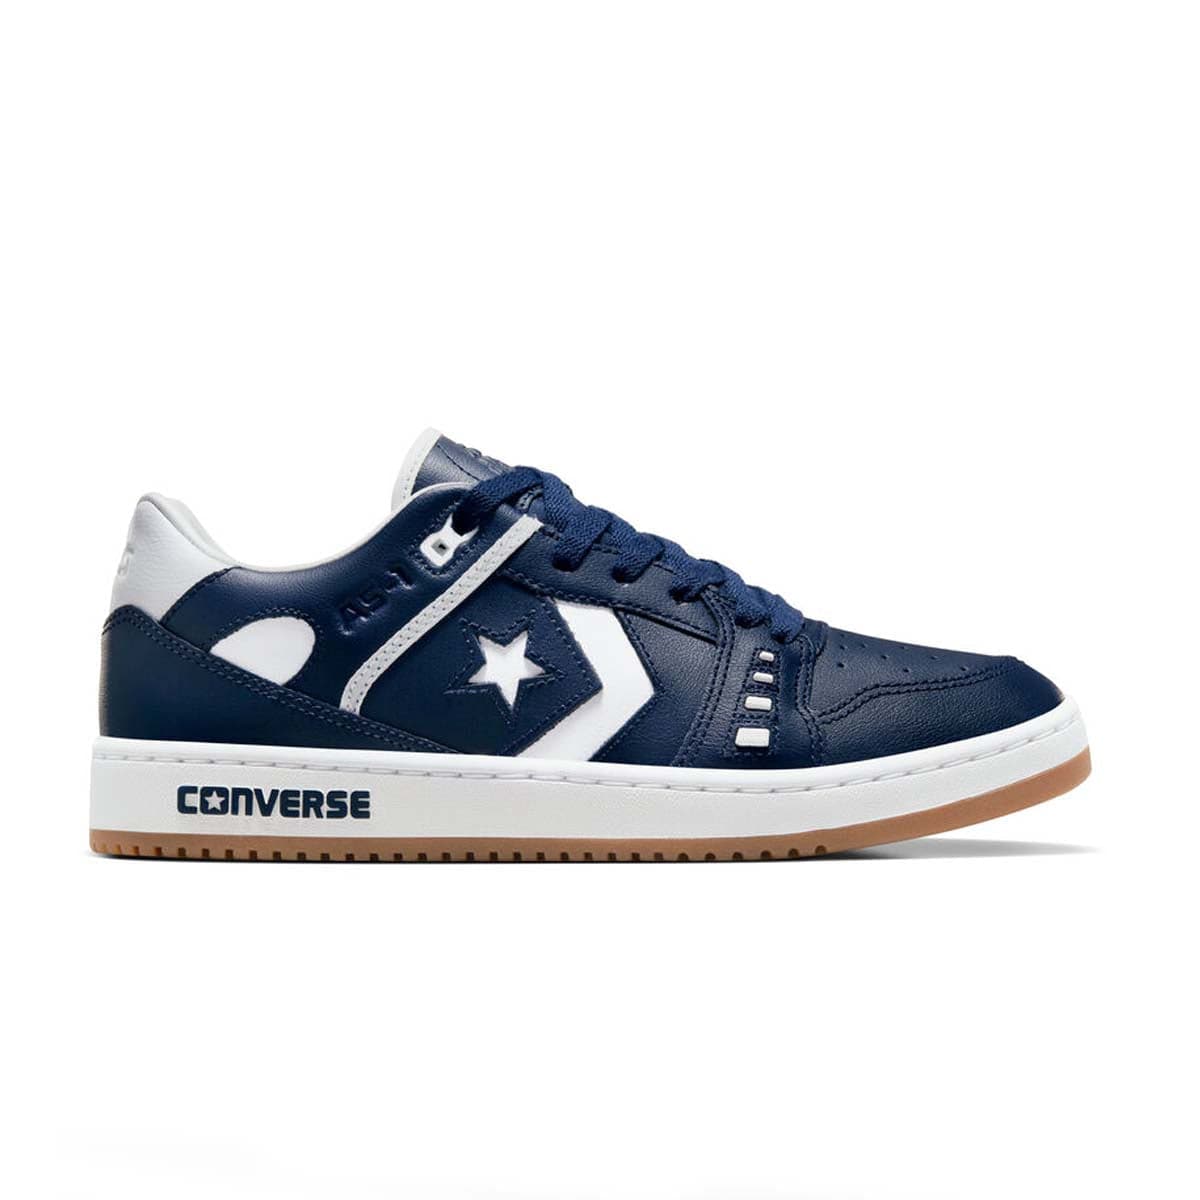 Shop with Limited Edt's Converse footwear collections